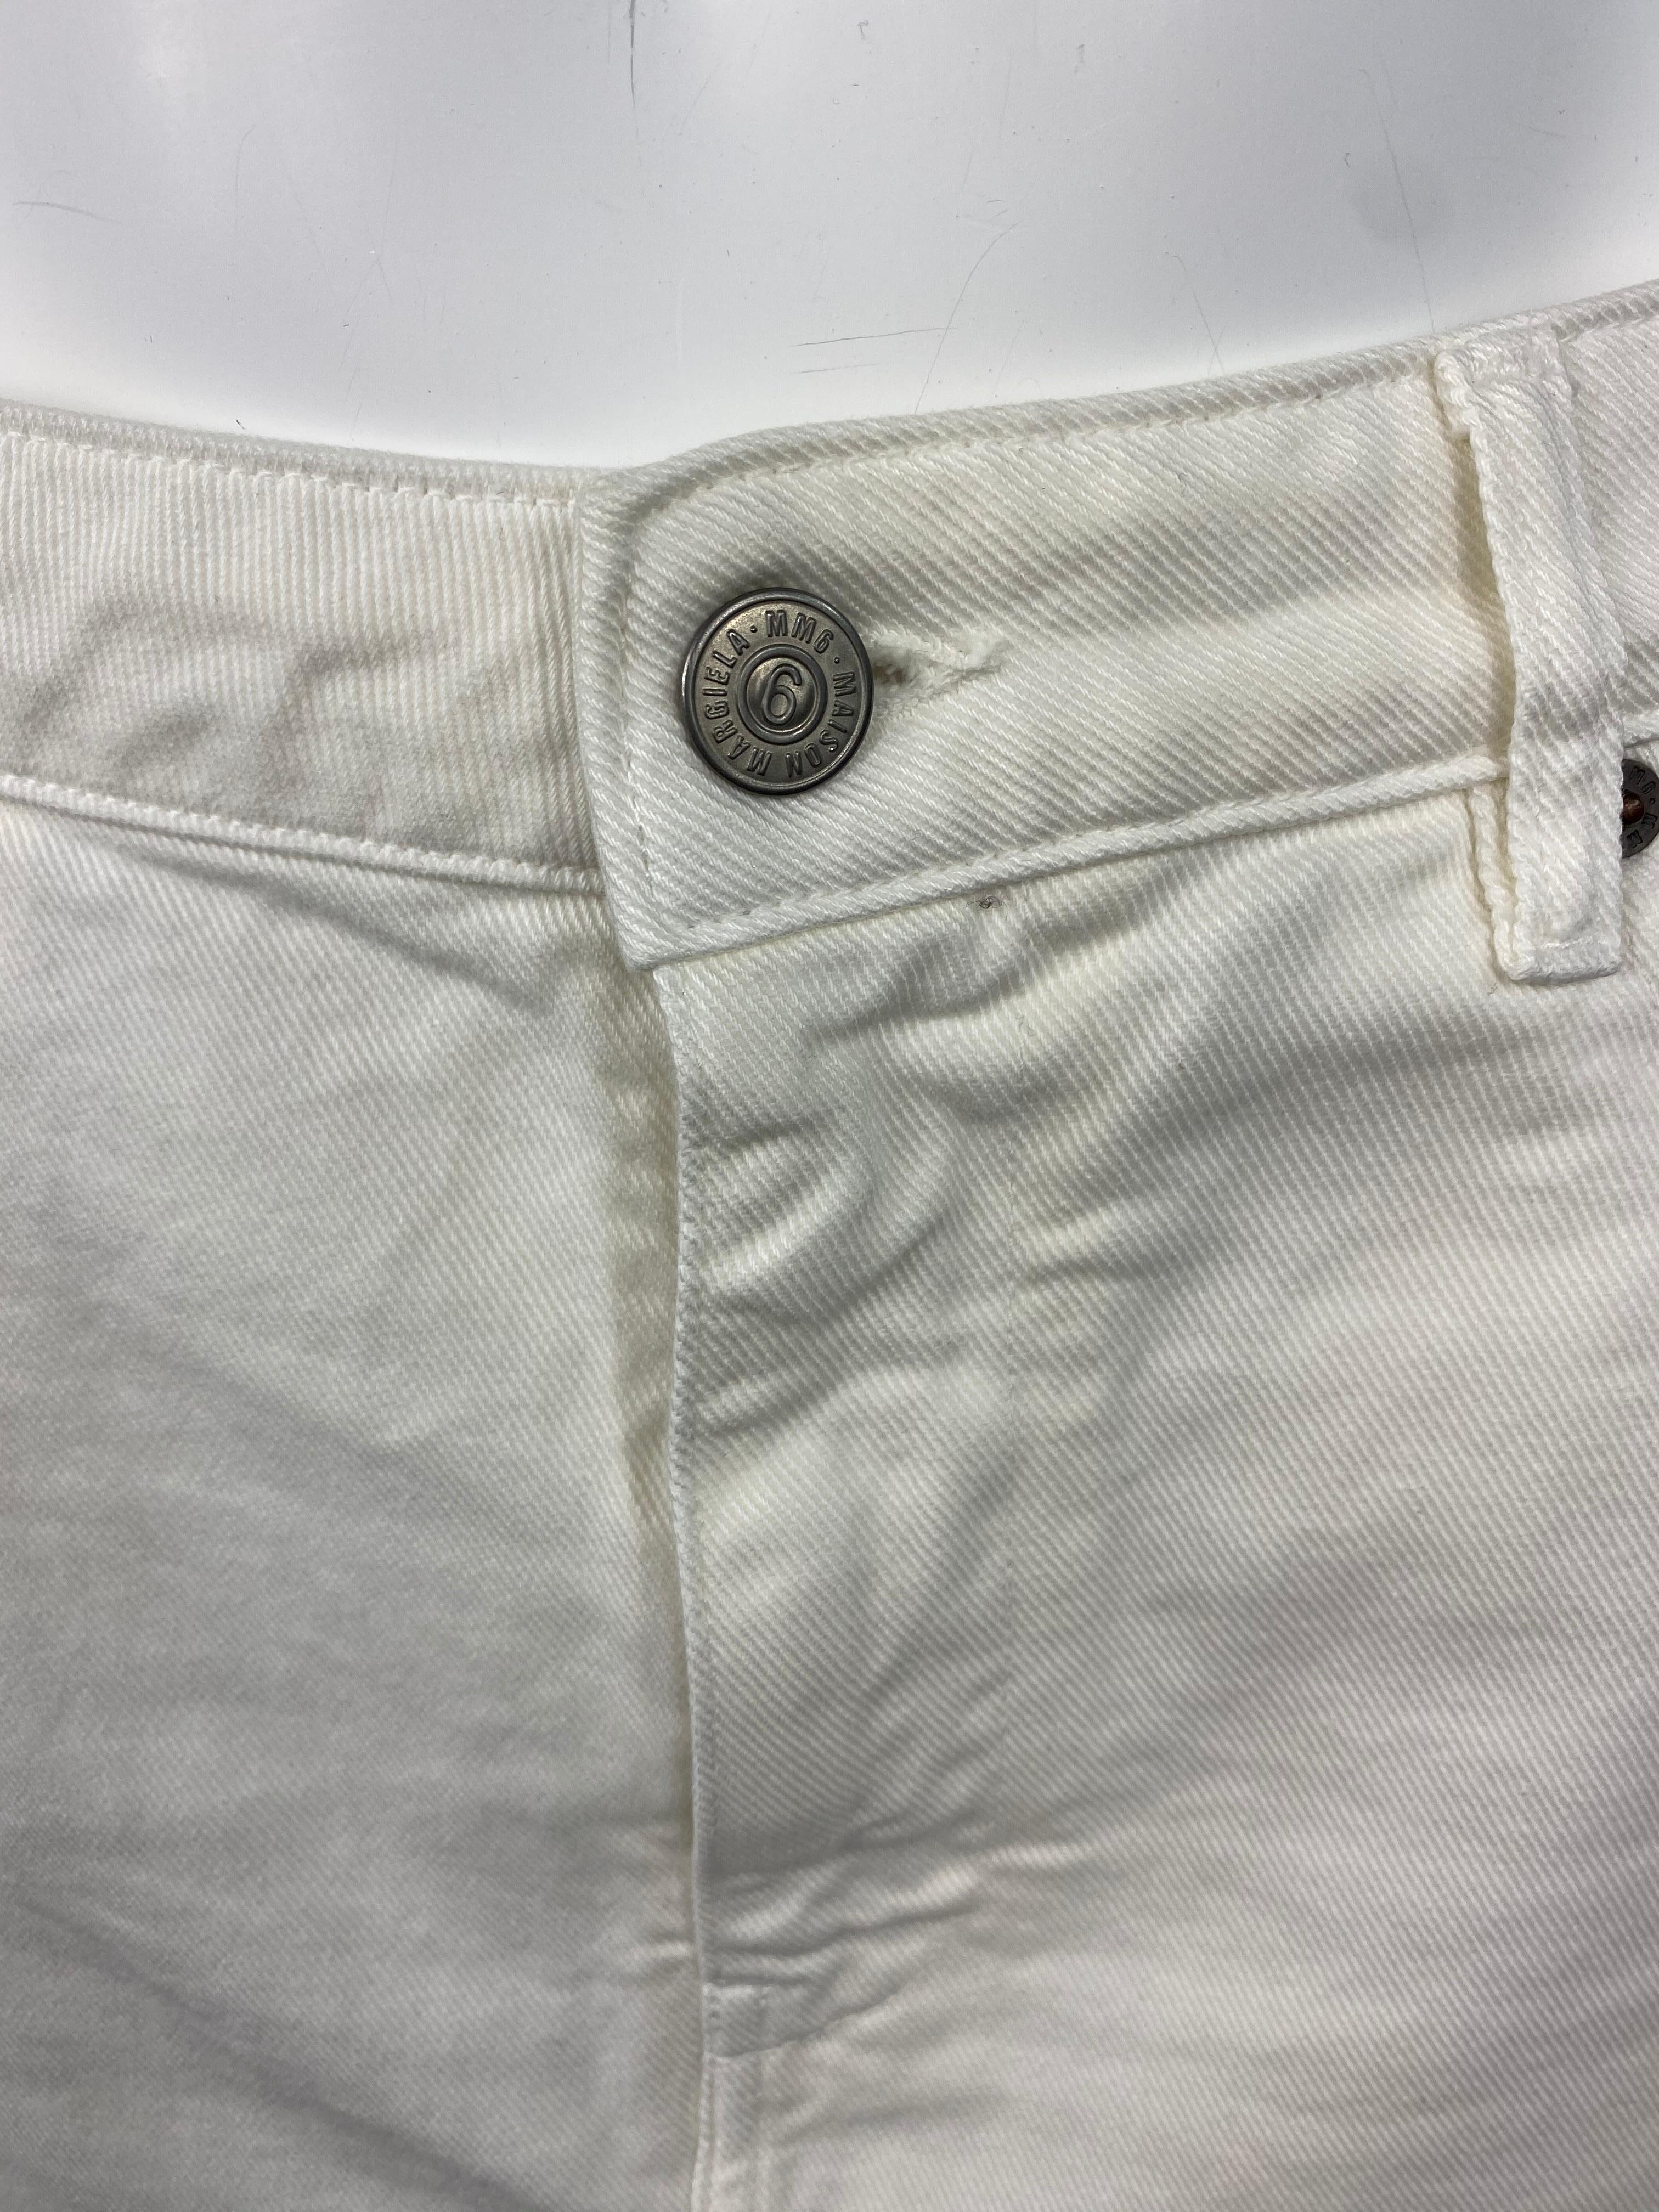 Product details:

Featuring white cotton denim pencil skirt, mid length with slit on the back and dial pockets on the front and back.
Made in Italy.